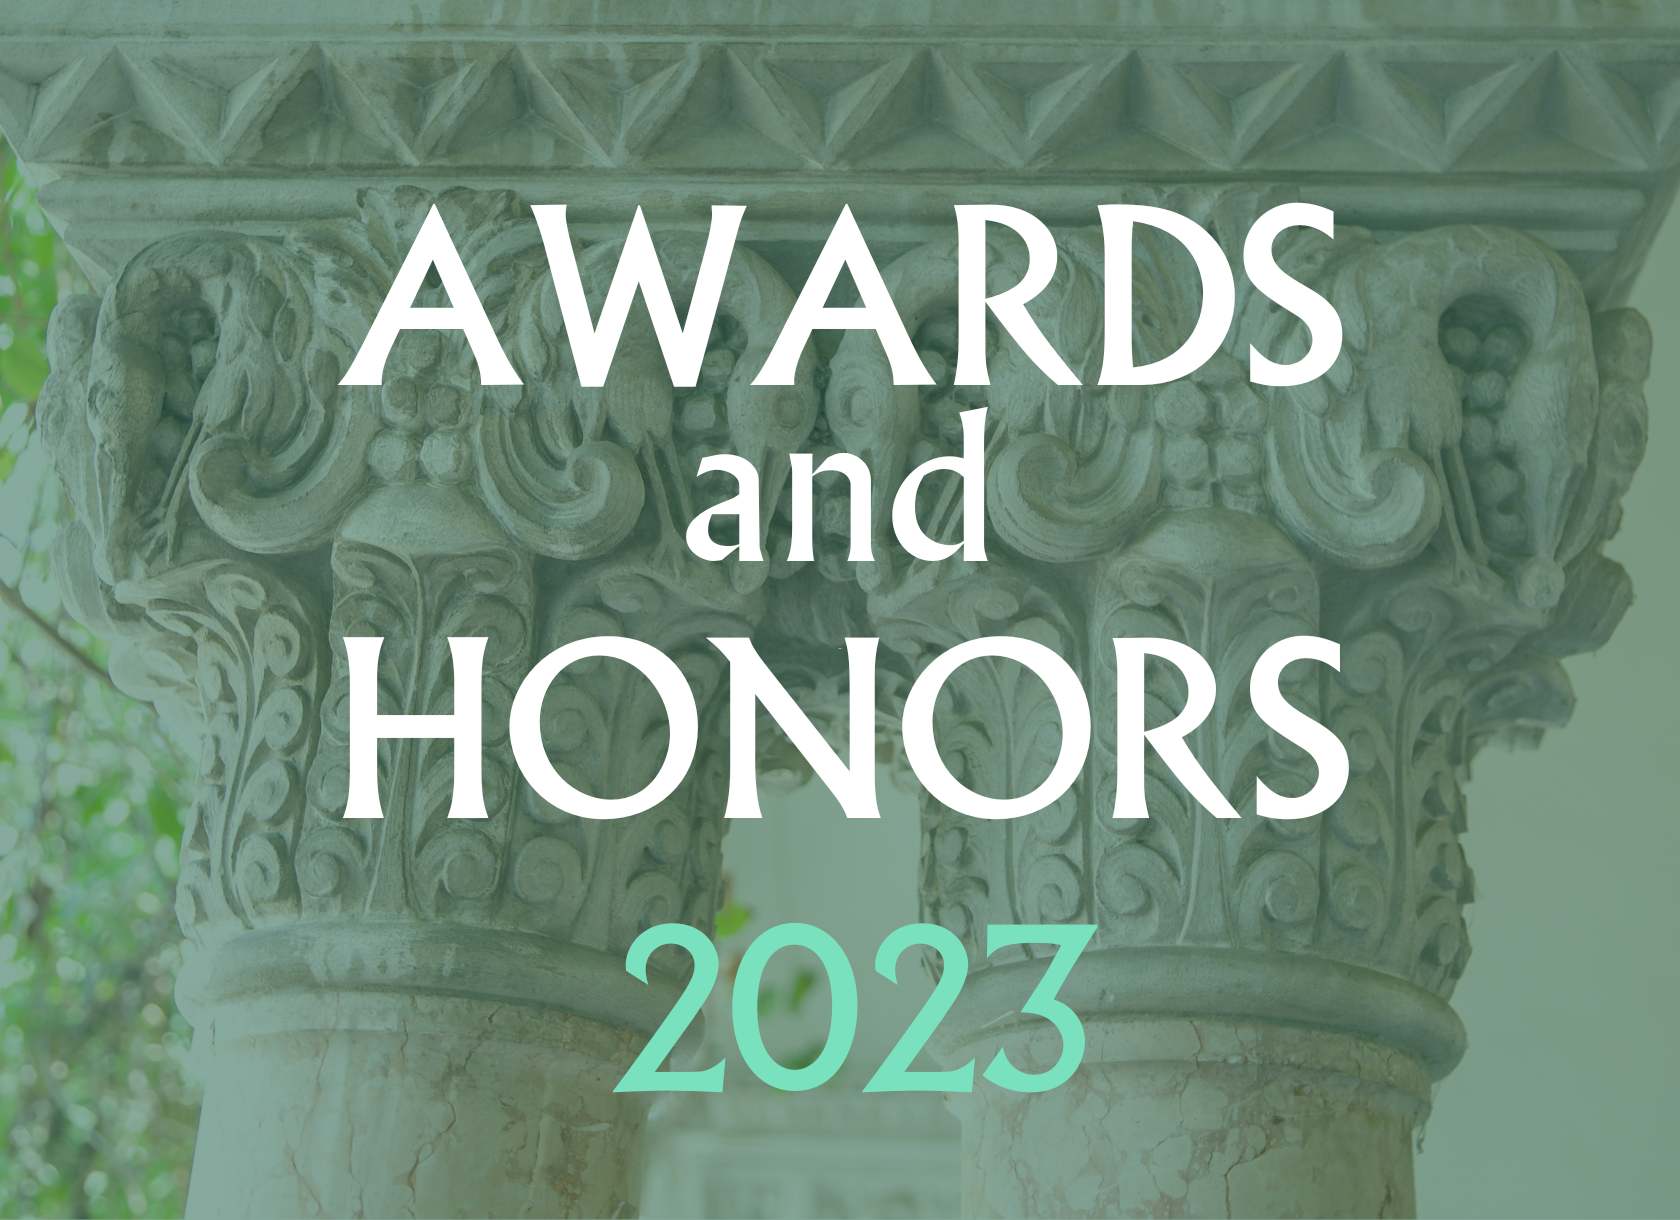 Awards and Honors 2023 graphic